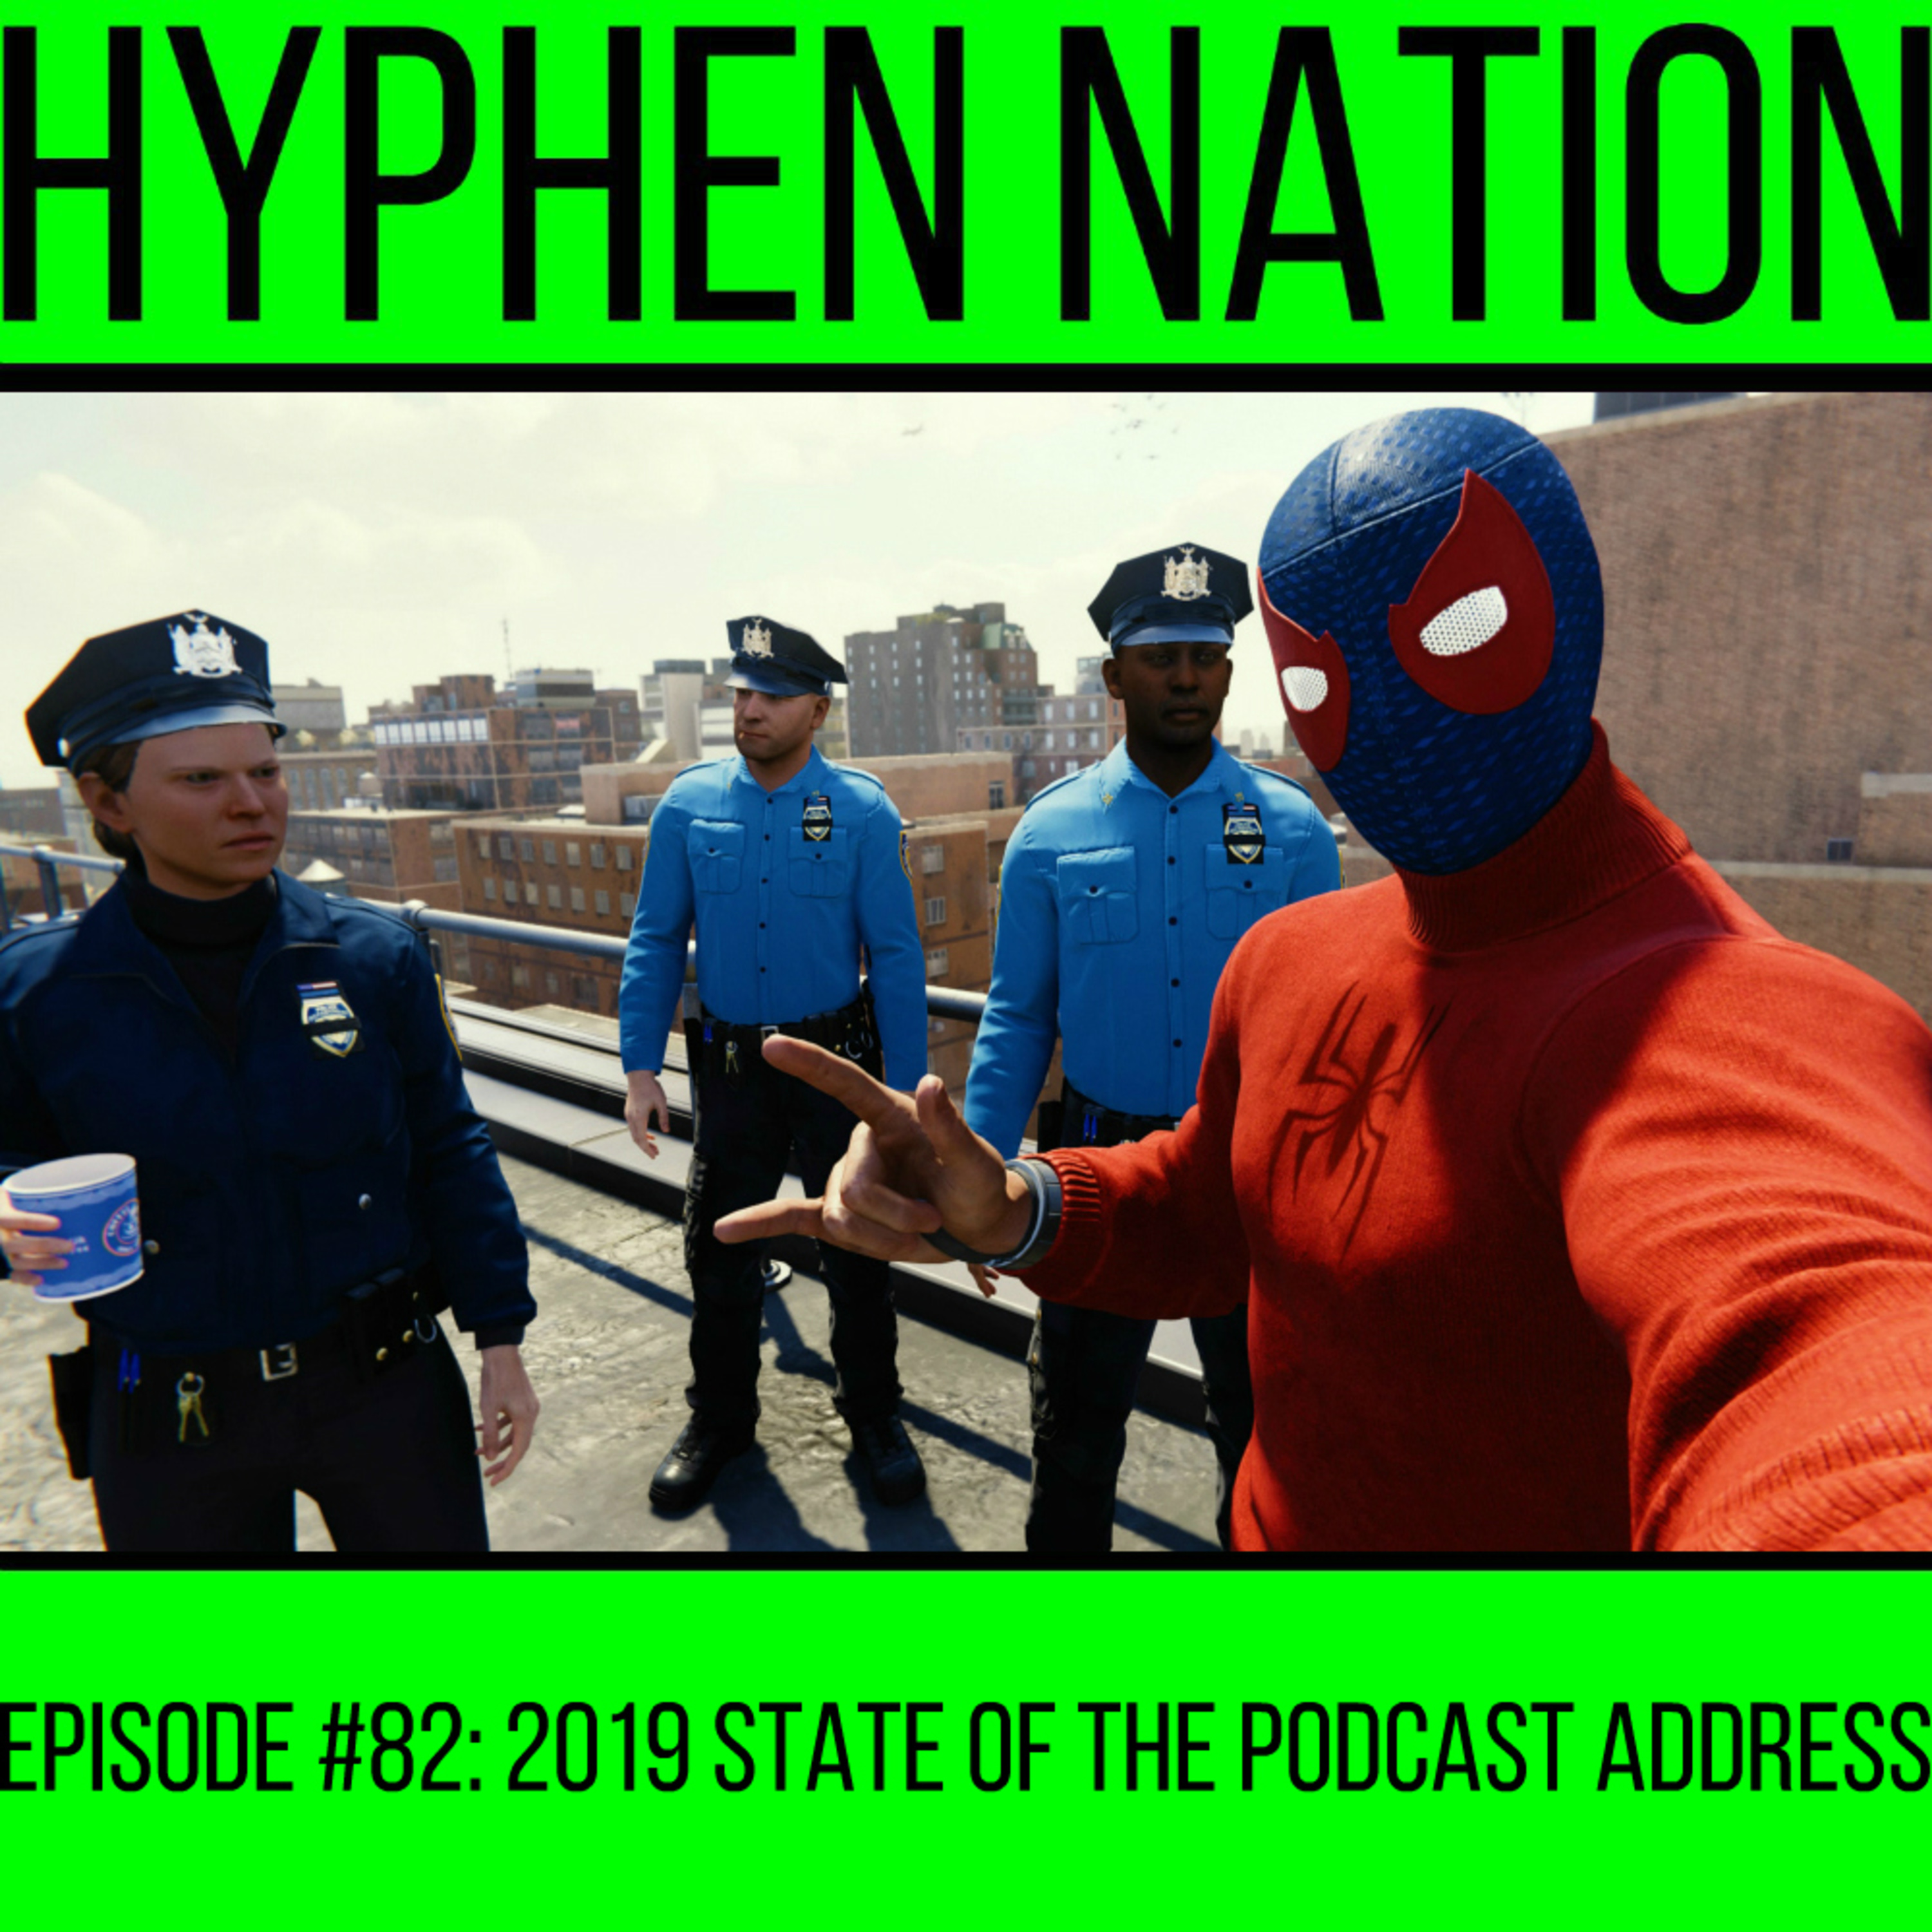 Episode #82: 2019 State Of The Podcast Address